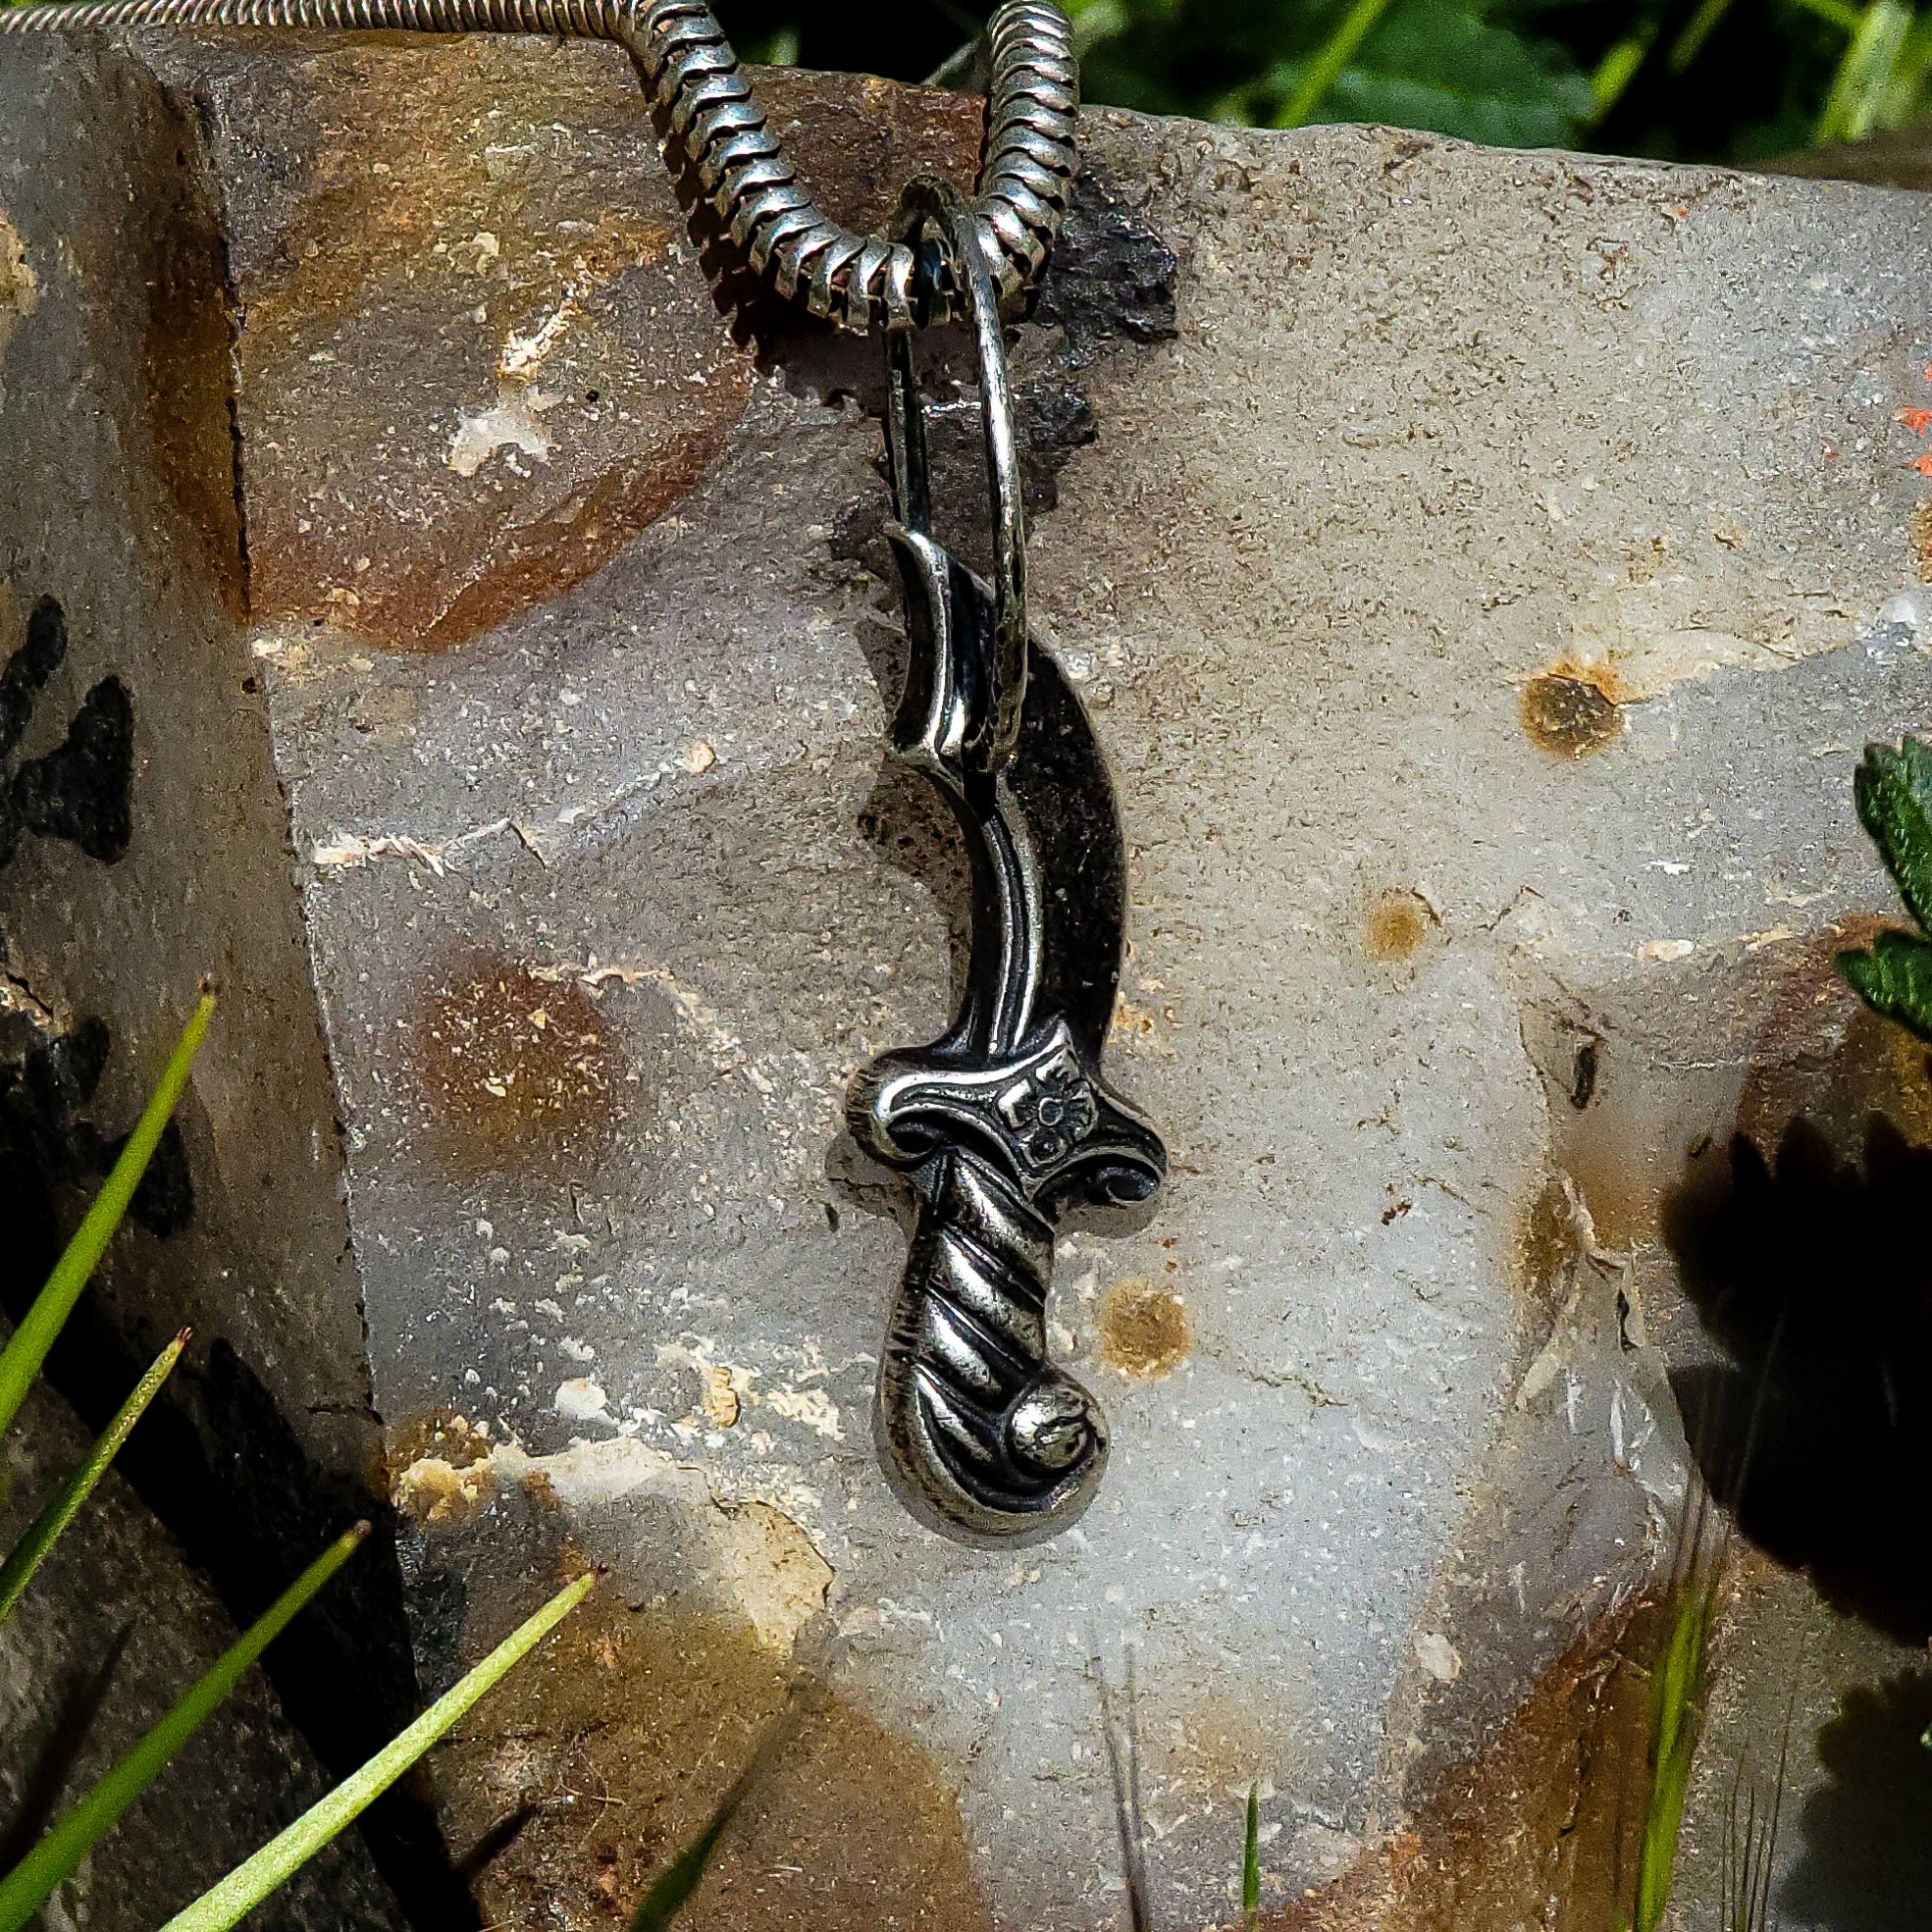 In the center of the image is a handmade sterling silver pendant in the shape of an ornate dagger with a unique tarnished finish. The pendant is resting on a large, flat rock with a multicolored beige pattern. In the background of the image, tufts of grass can be seen. The pendant's hammer detailed jump ring and the tarnished finish are accentuated by the neutral background of the rock, which appears to have a rough texture.